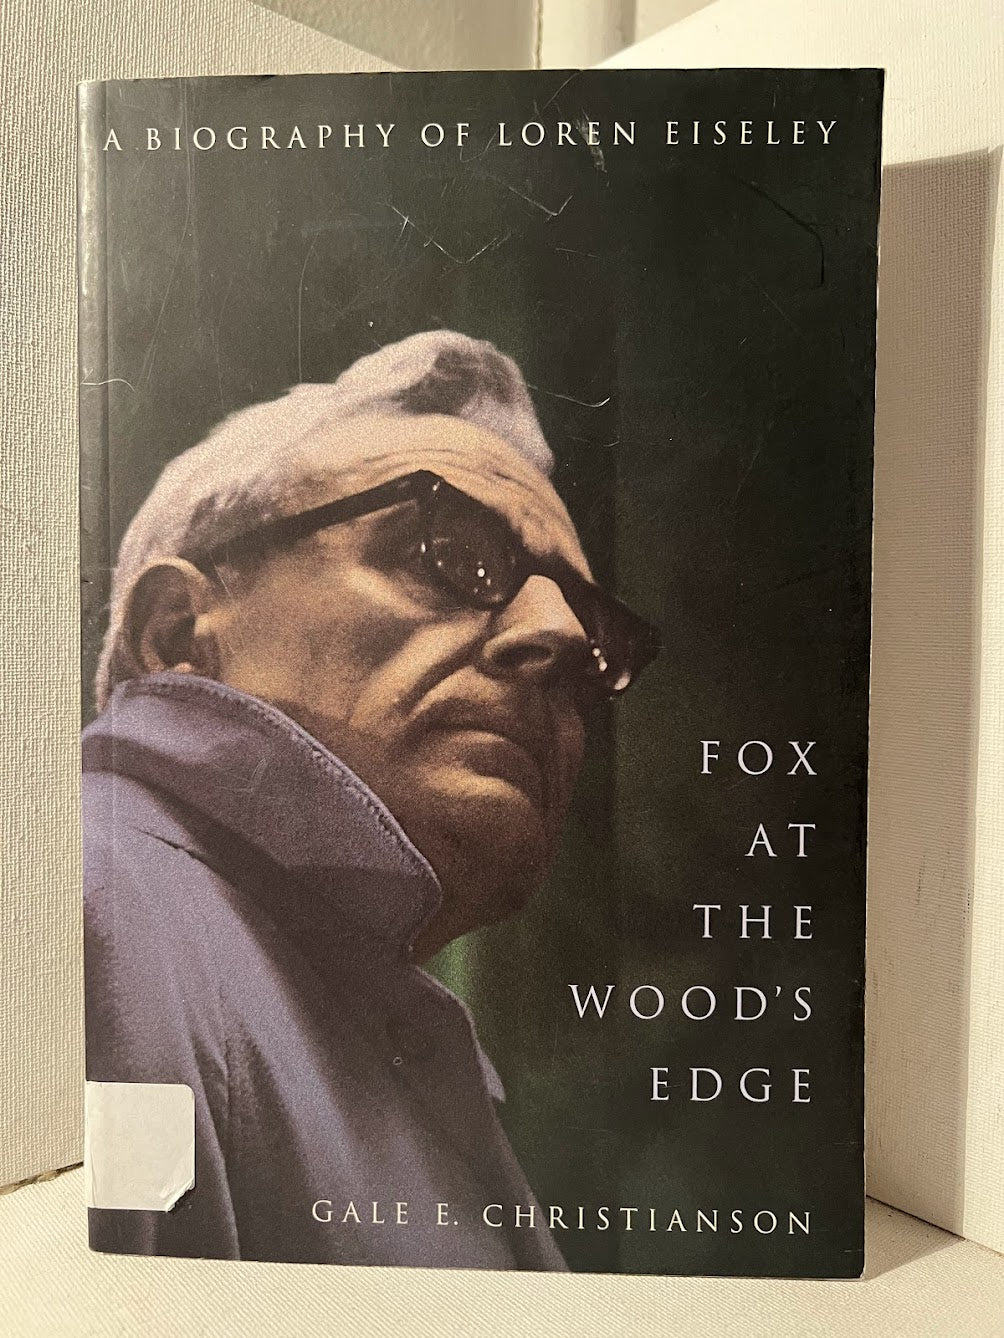 Fox at the Edge of the Woods: A Biography of Loren Eiseley by Gale E. Christianson